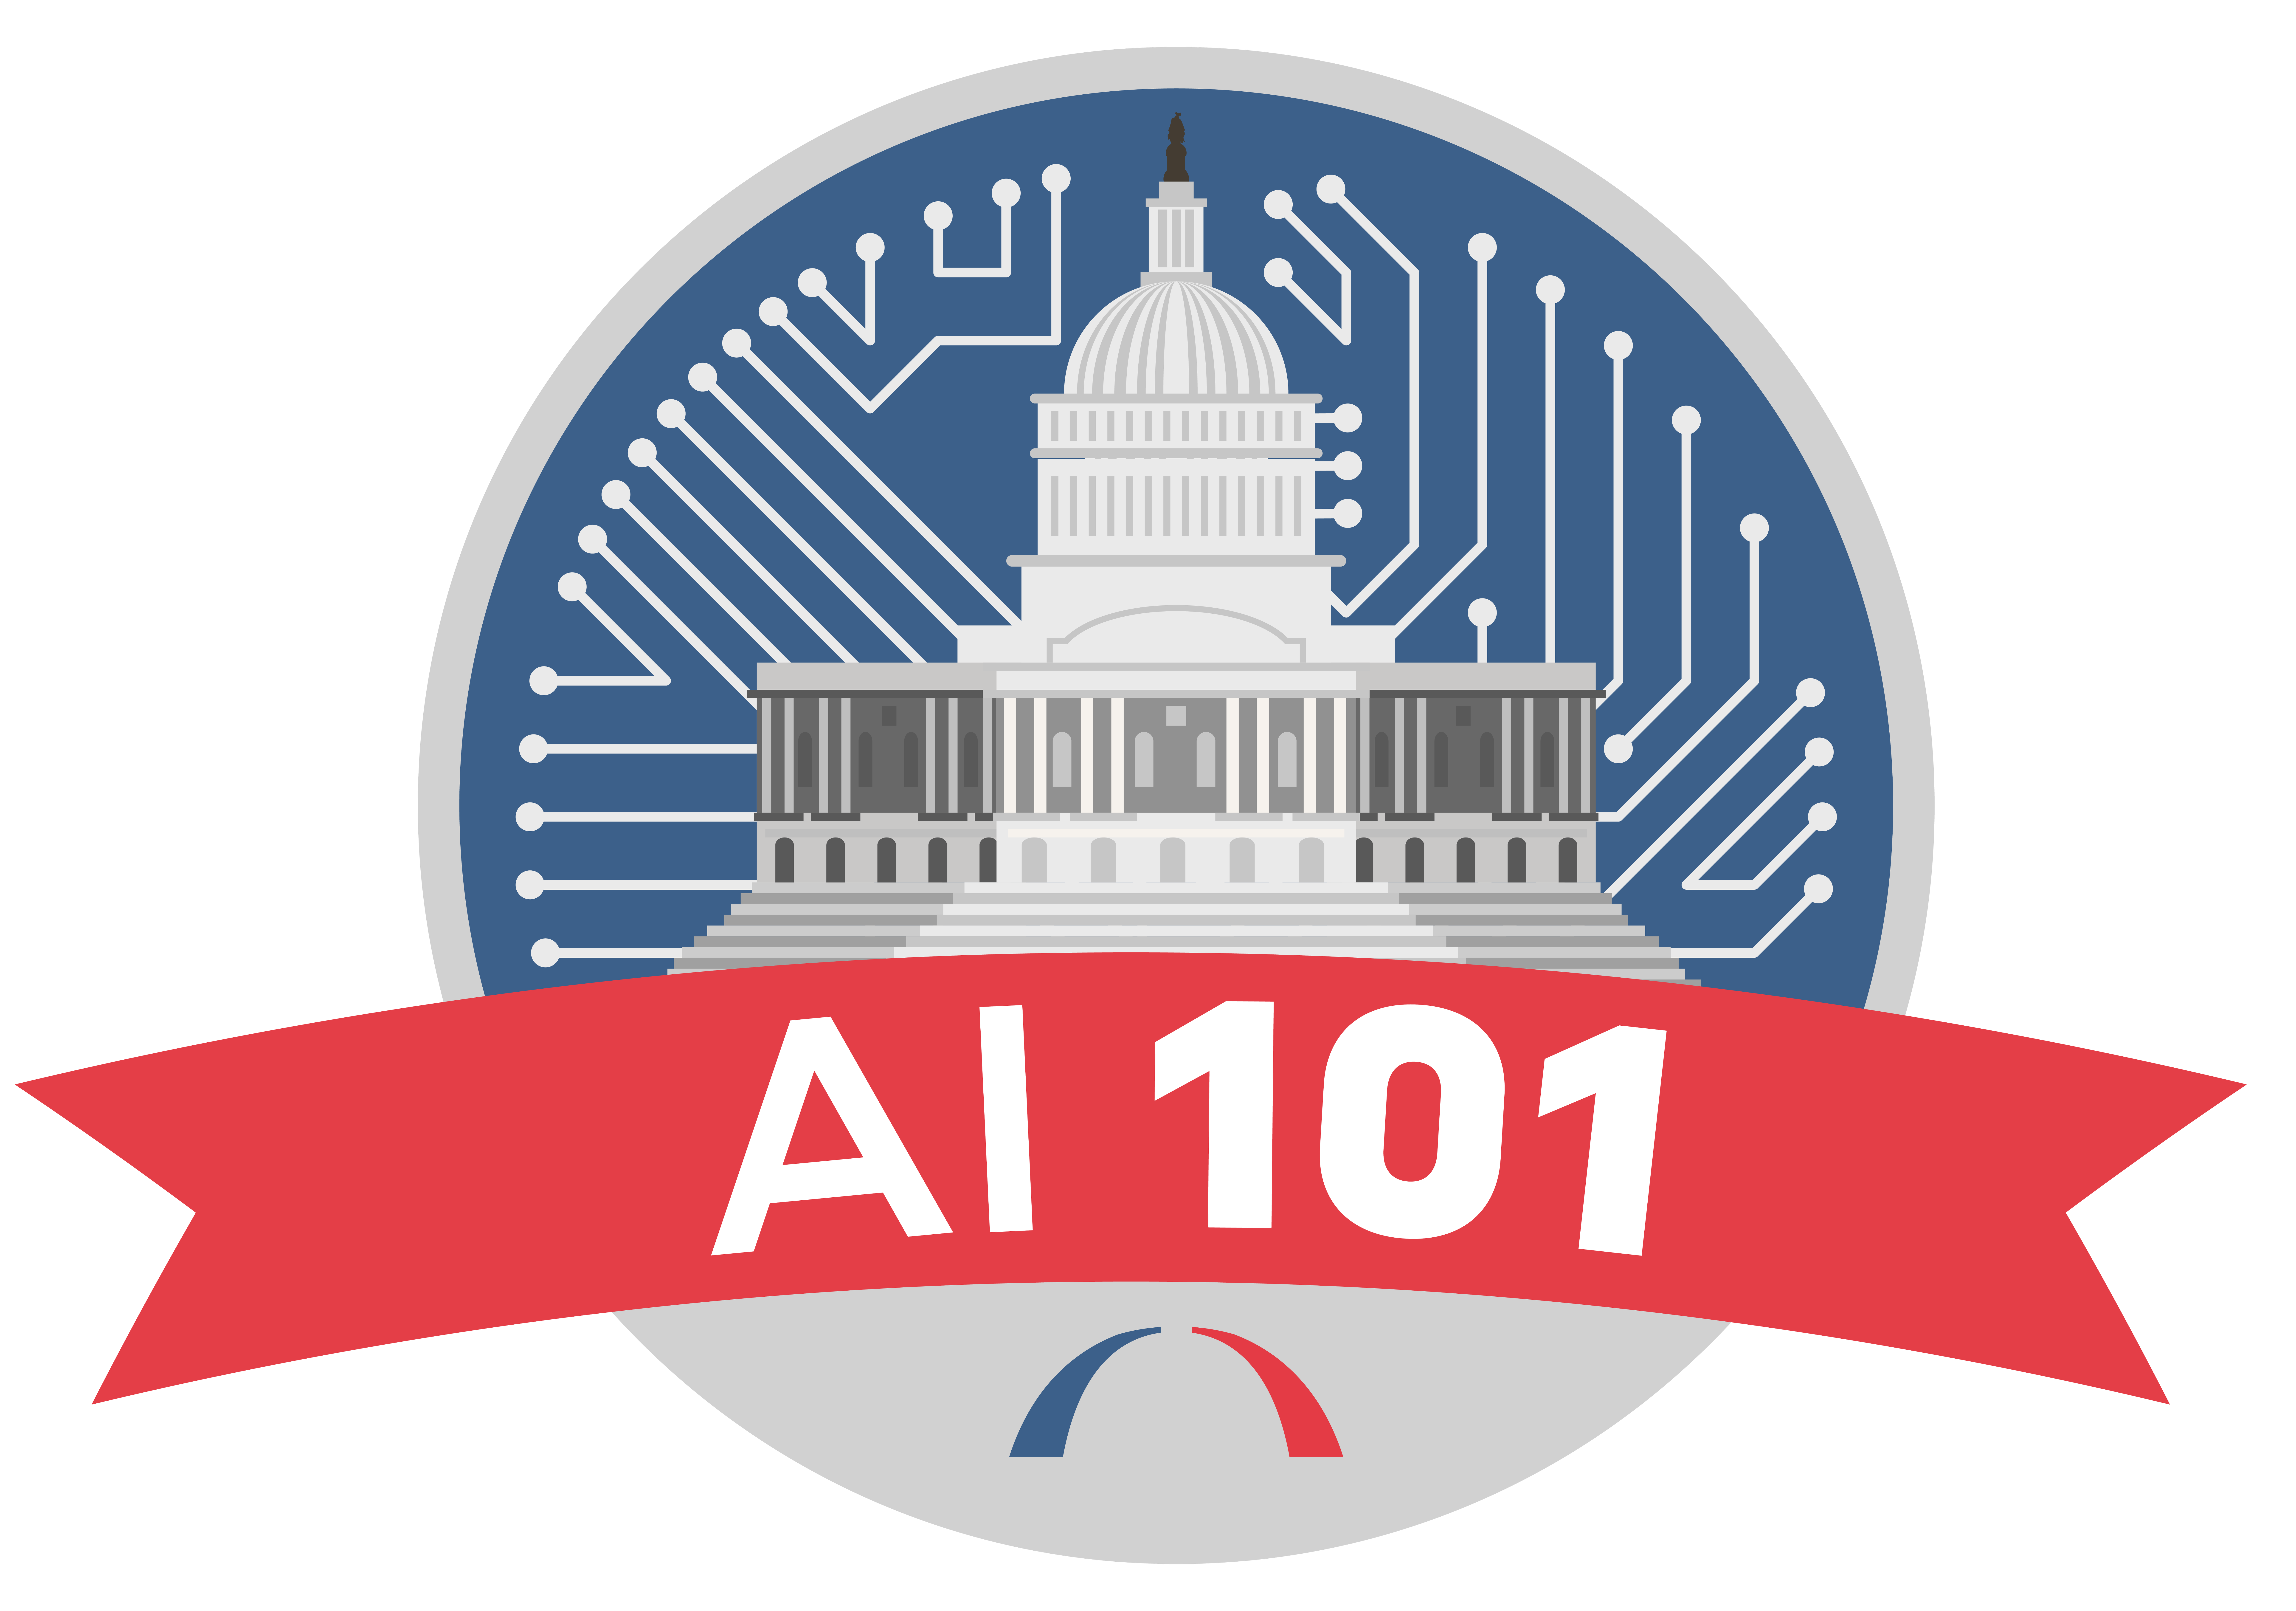 AI 101 logo of the US Capitol building with computer circuitry behind it